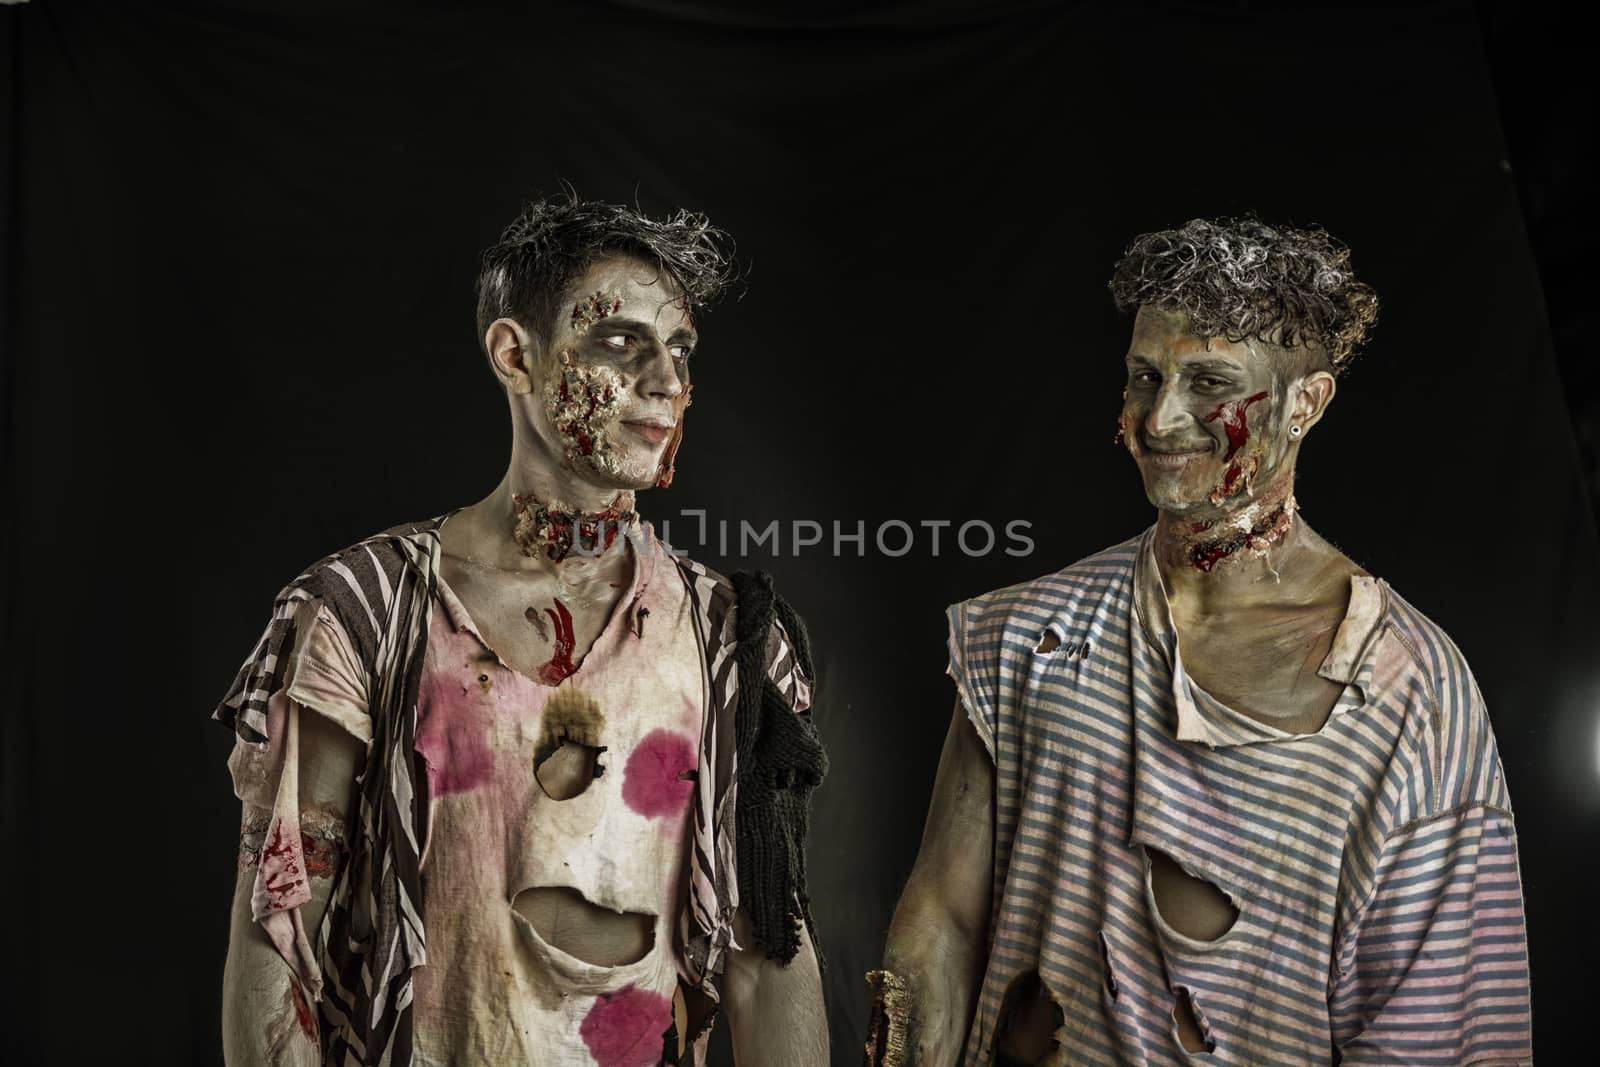 Two male zombies standing on black background, looking at each other smiling